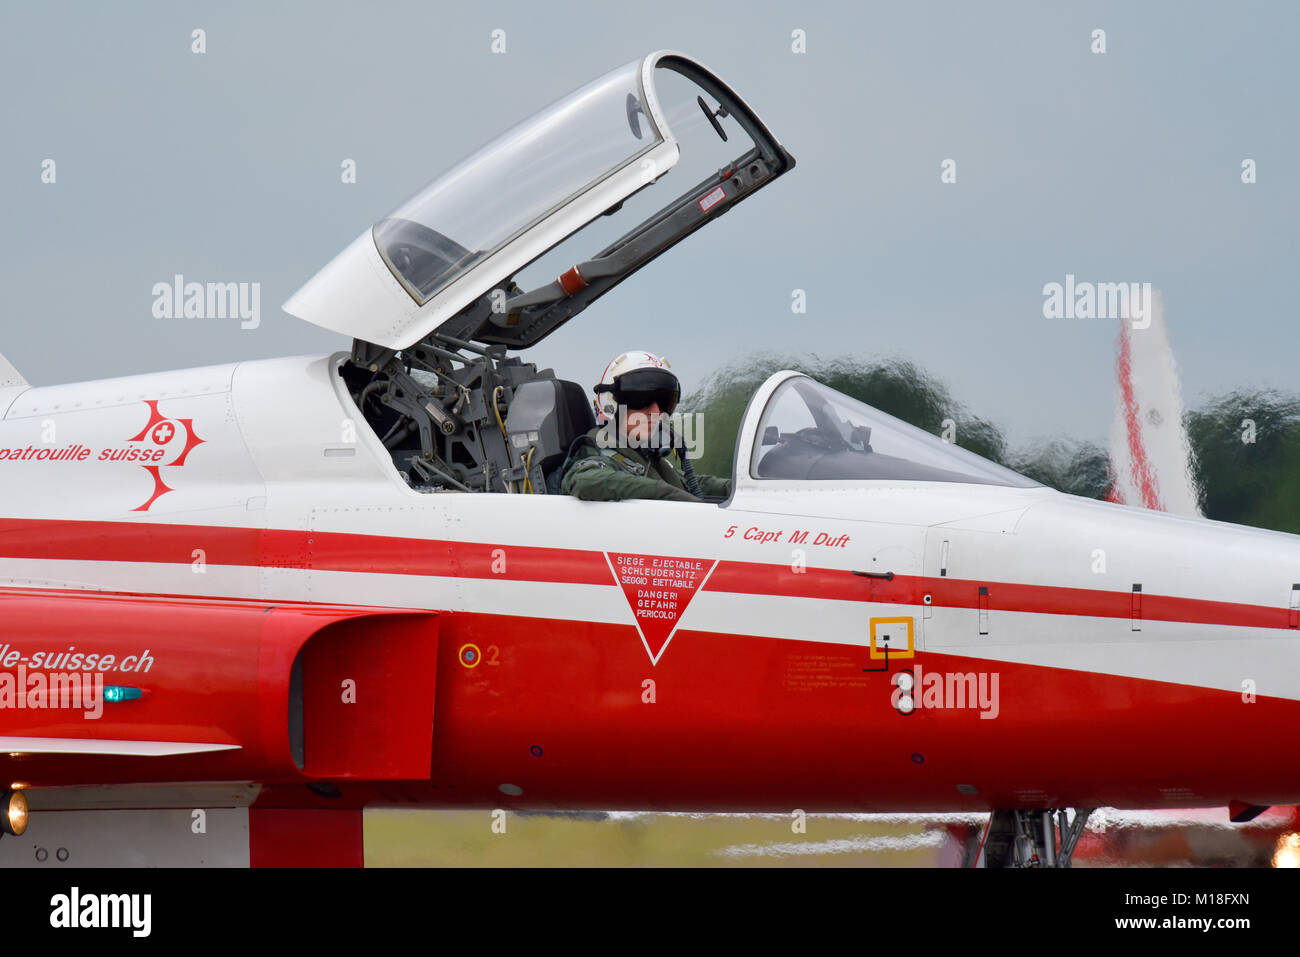 Patrouille Suisse aerobatic team of the Swiss Air Force. The team flies six Northrop F-5E Tiger II fighter jet planes. Pilot Captain M Duft Stock Photo